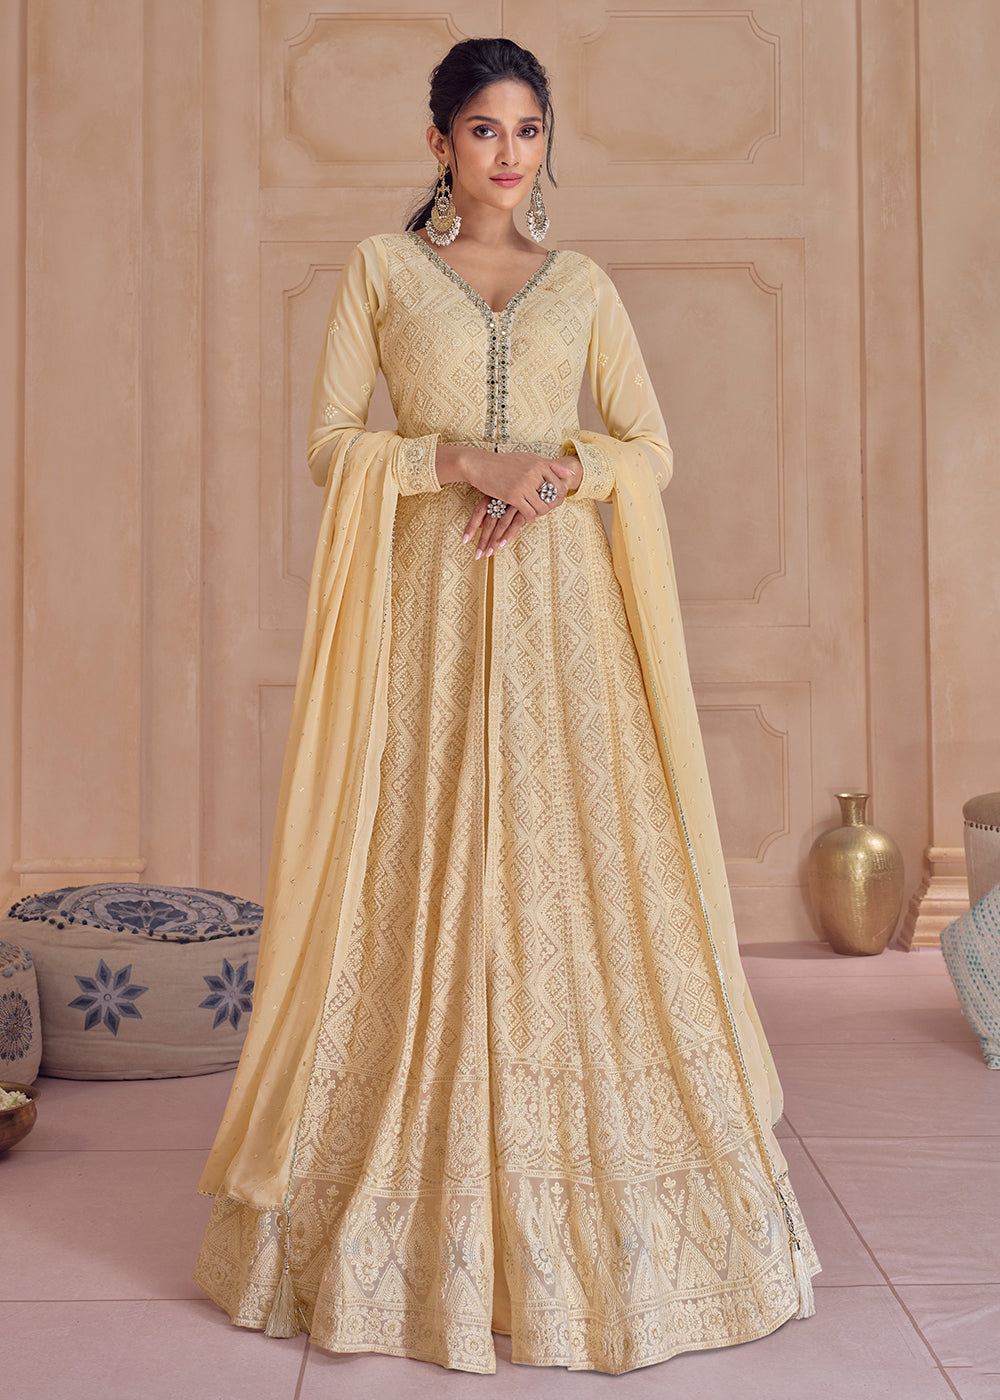 Buy Now Palazzo Style Fawn Yellow Lucknowi Embroidered Anarkali Suit Online in USA, UK, Australia, New Zealand, Canada & Worldwide at Empress Clothing.